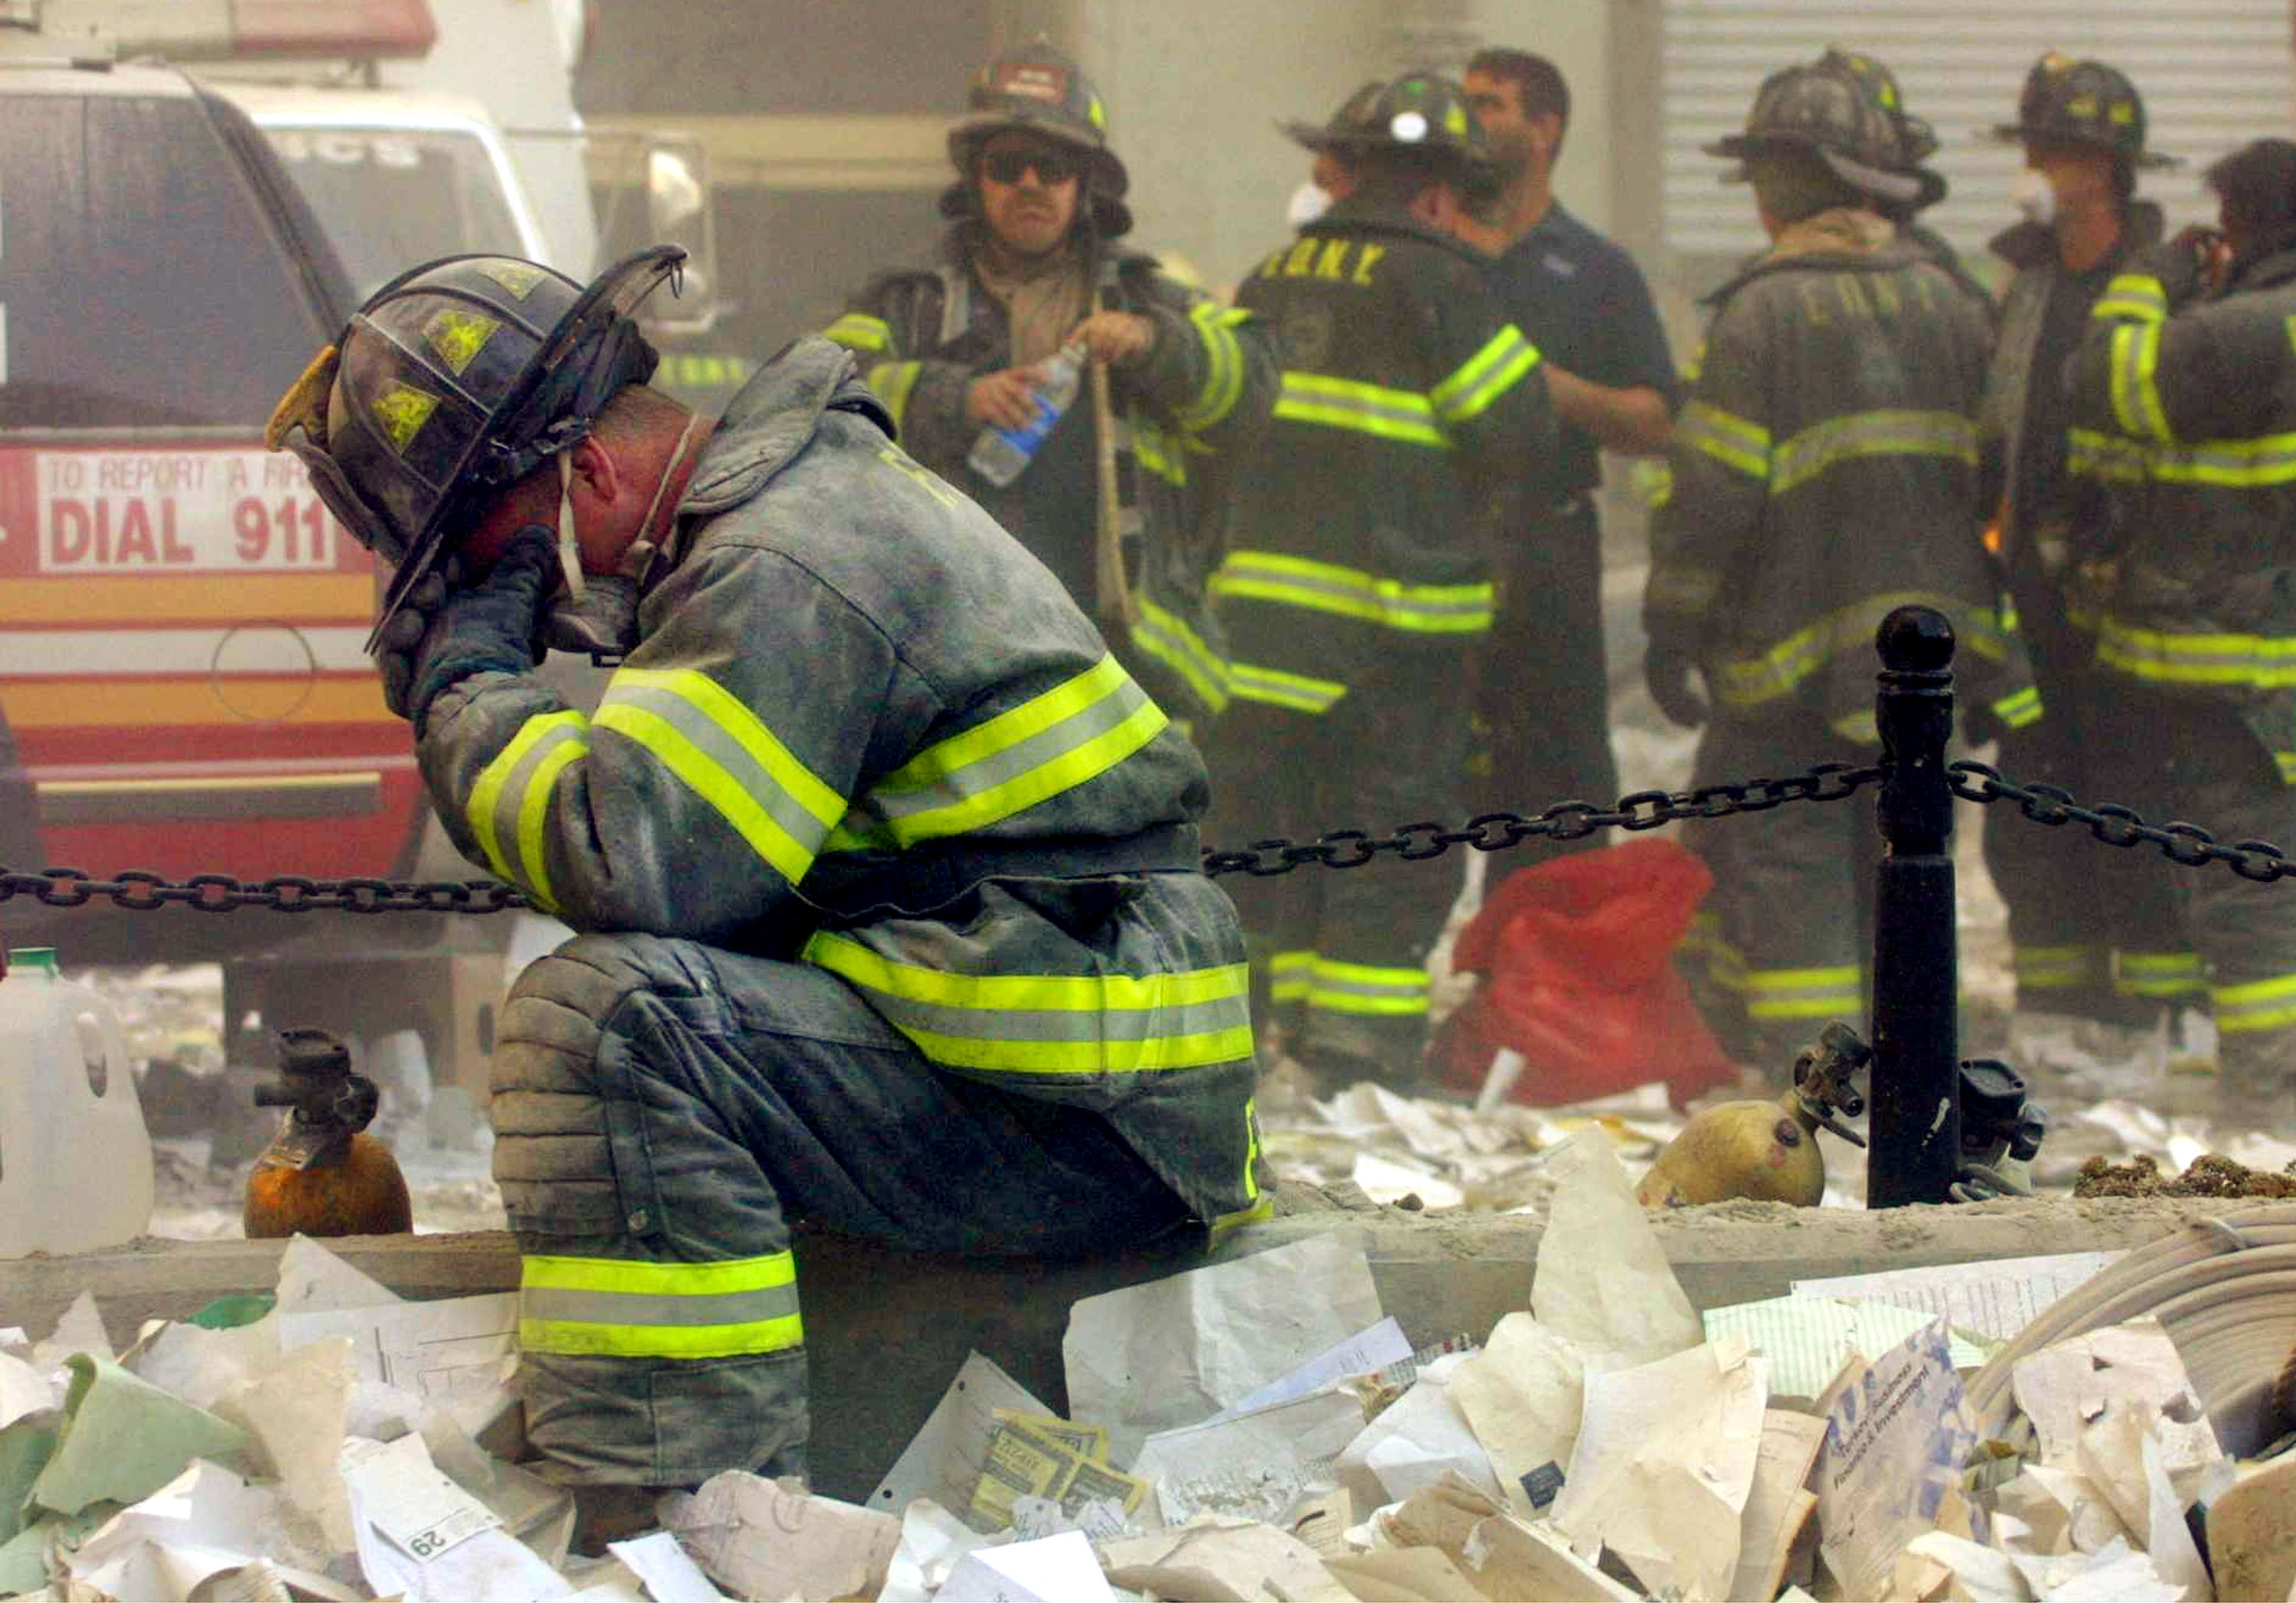 NEWSLINE: Study shows mental health impact of 9/11 on first responders